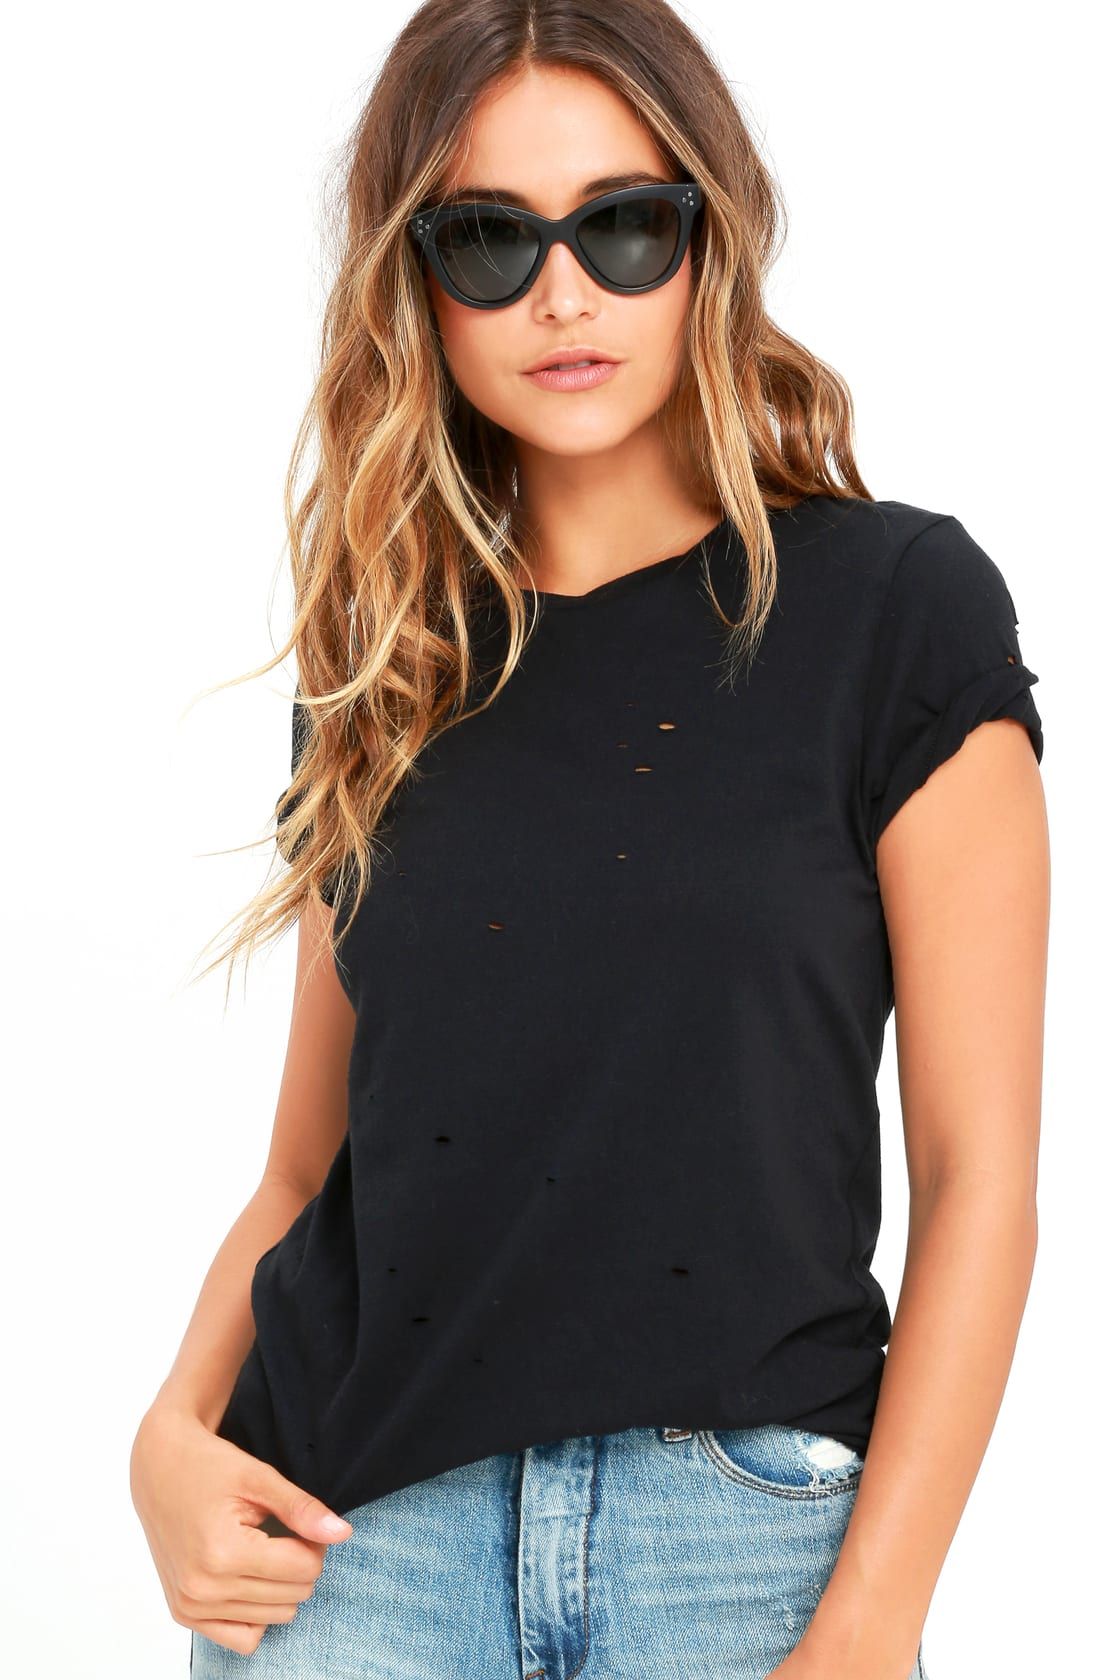 In the Raw Distressed Washed Black Tee | Lulus